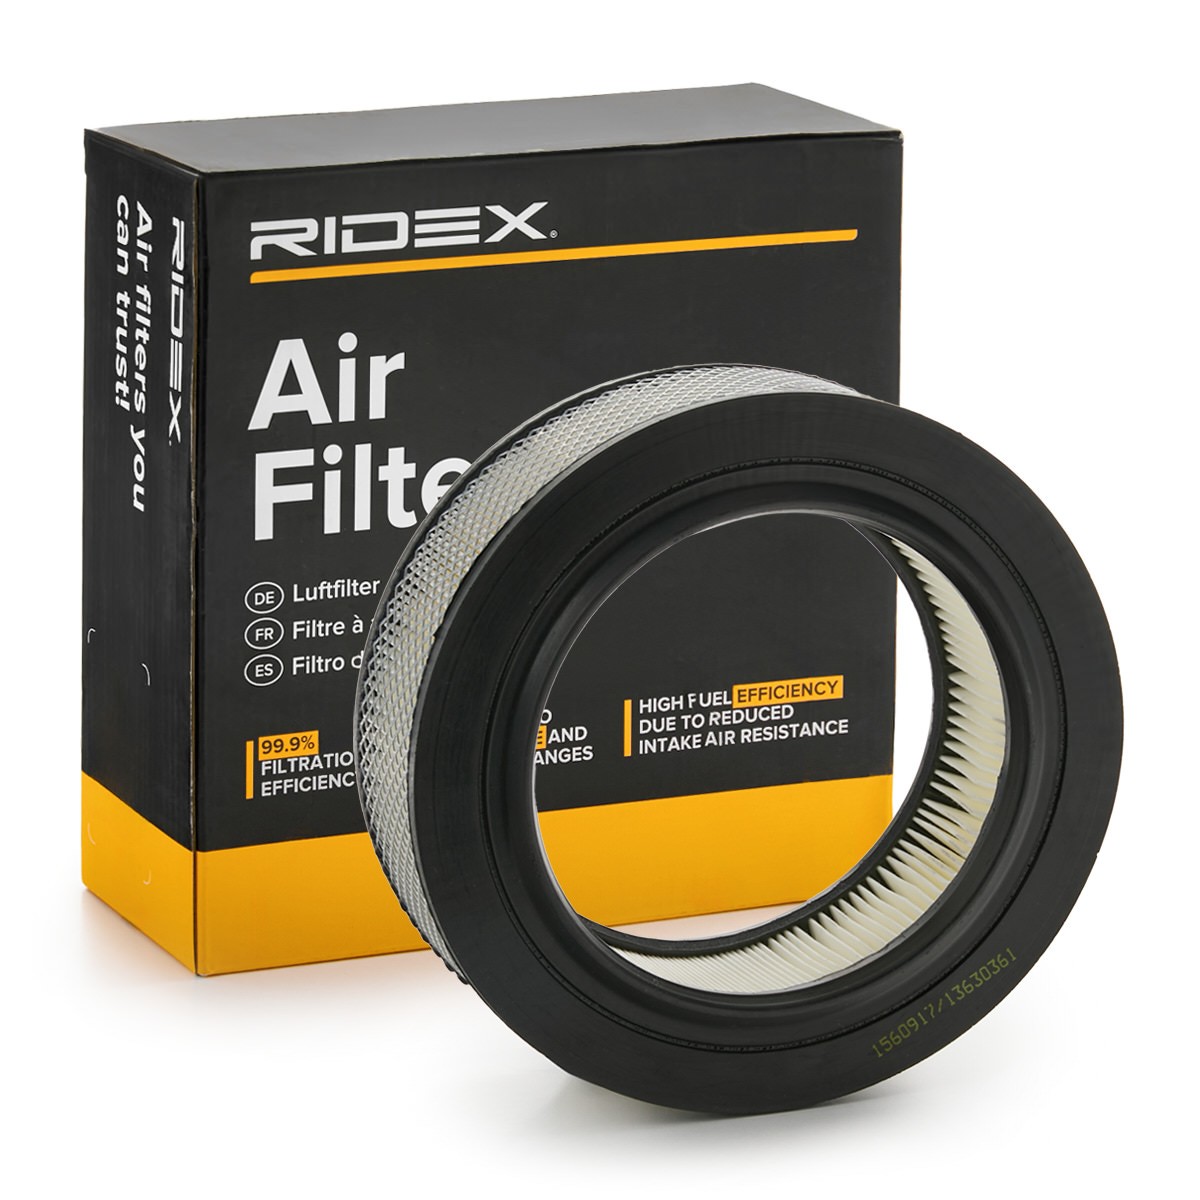 Great value for money - RIDEX Air filter 8A0445